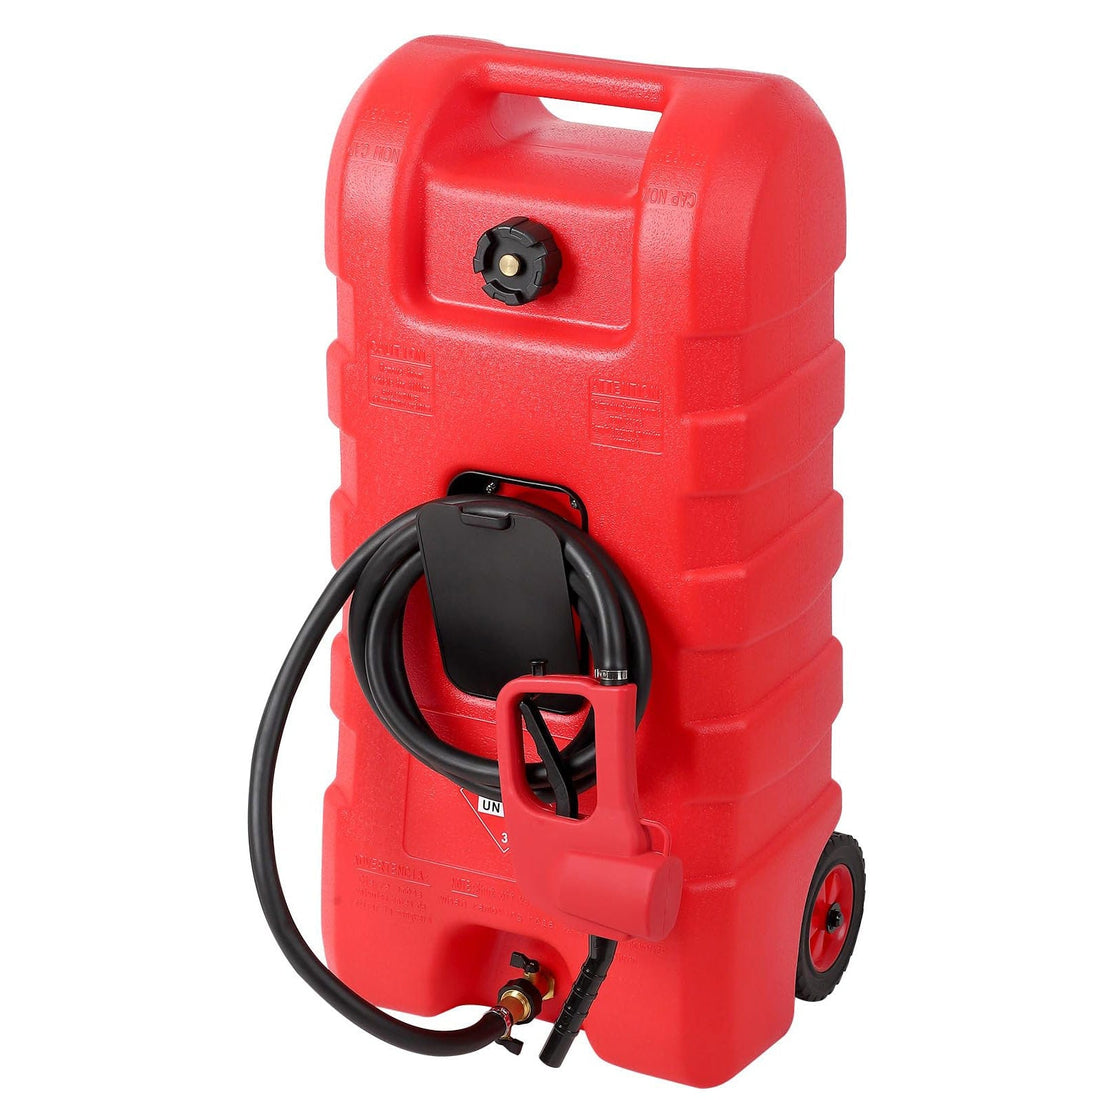 15 Gal Portable Fuel Caddy w/ LE Pump for Cars, Mowers, ATVs